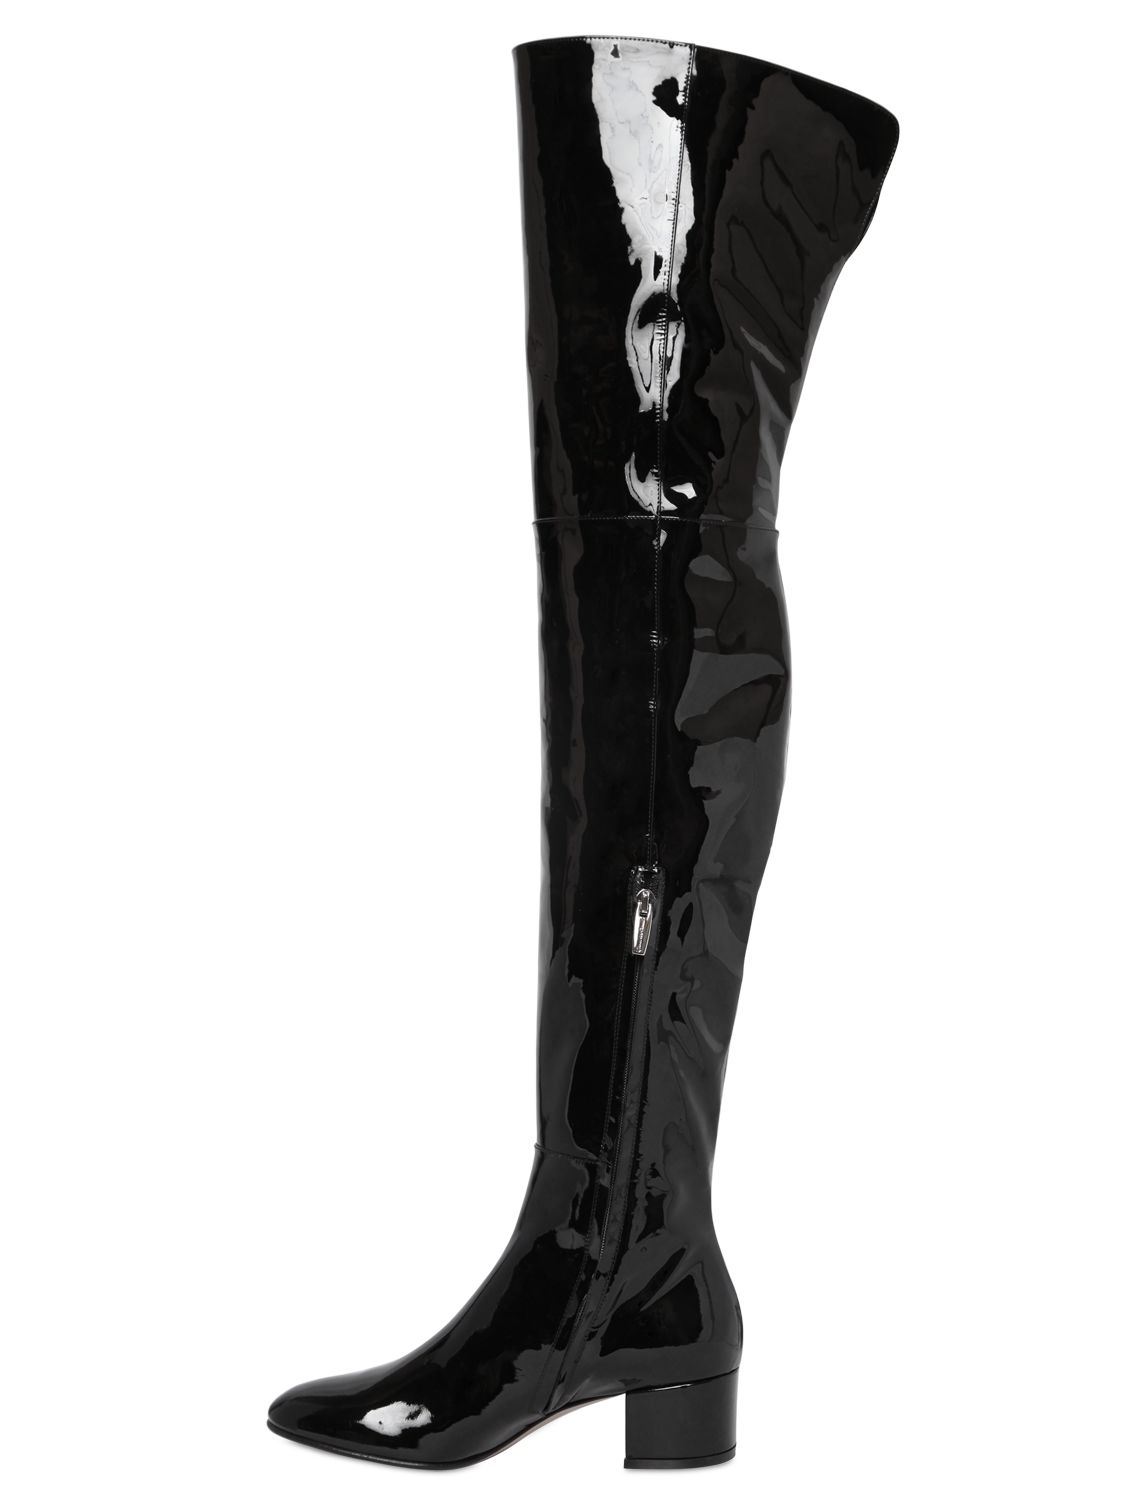 Lyst - Gianvito Rossi 45mm Patent Leather Over The Knee Boots in Black